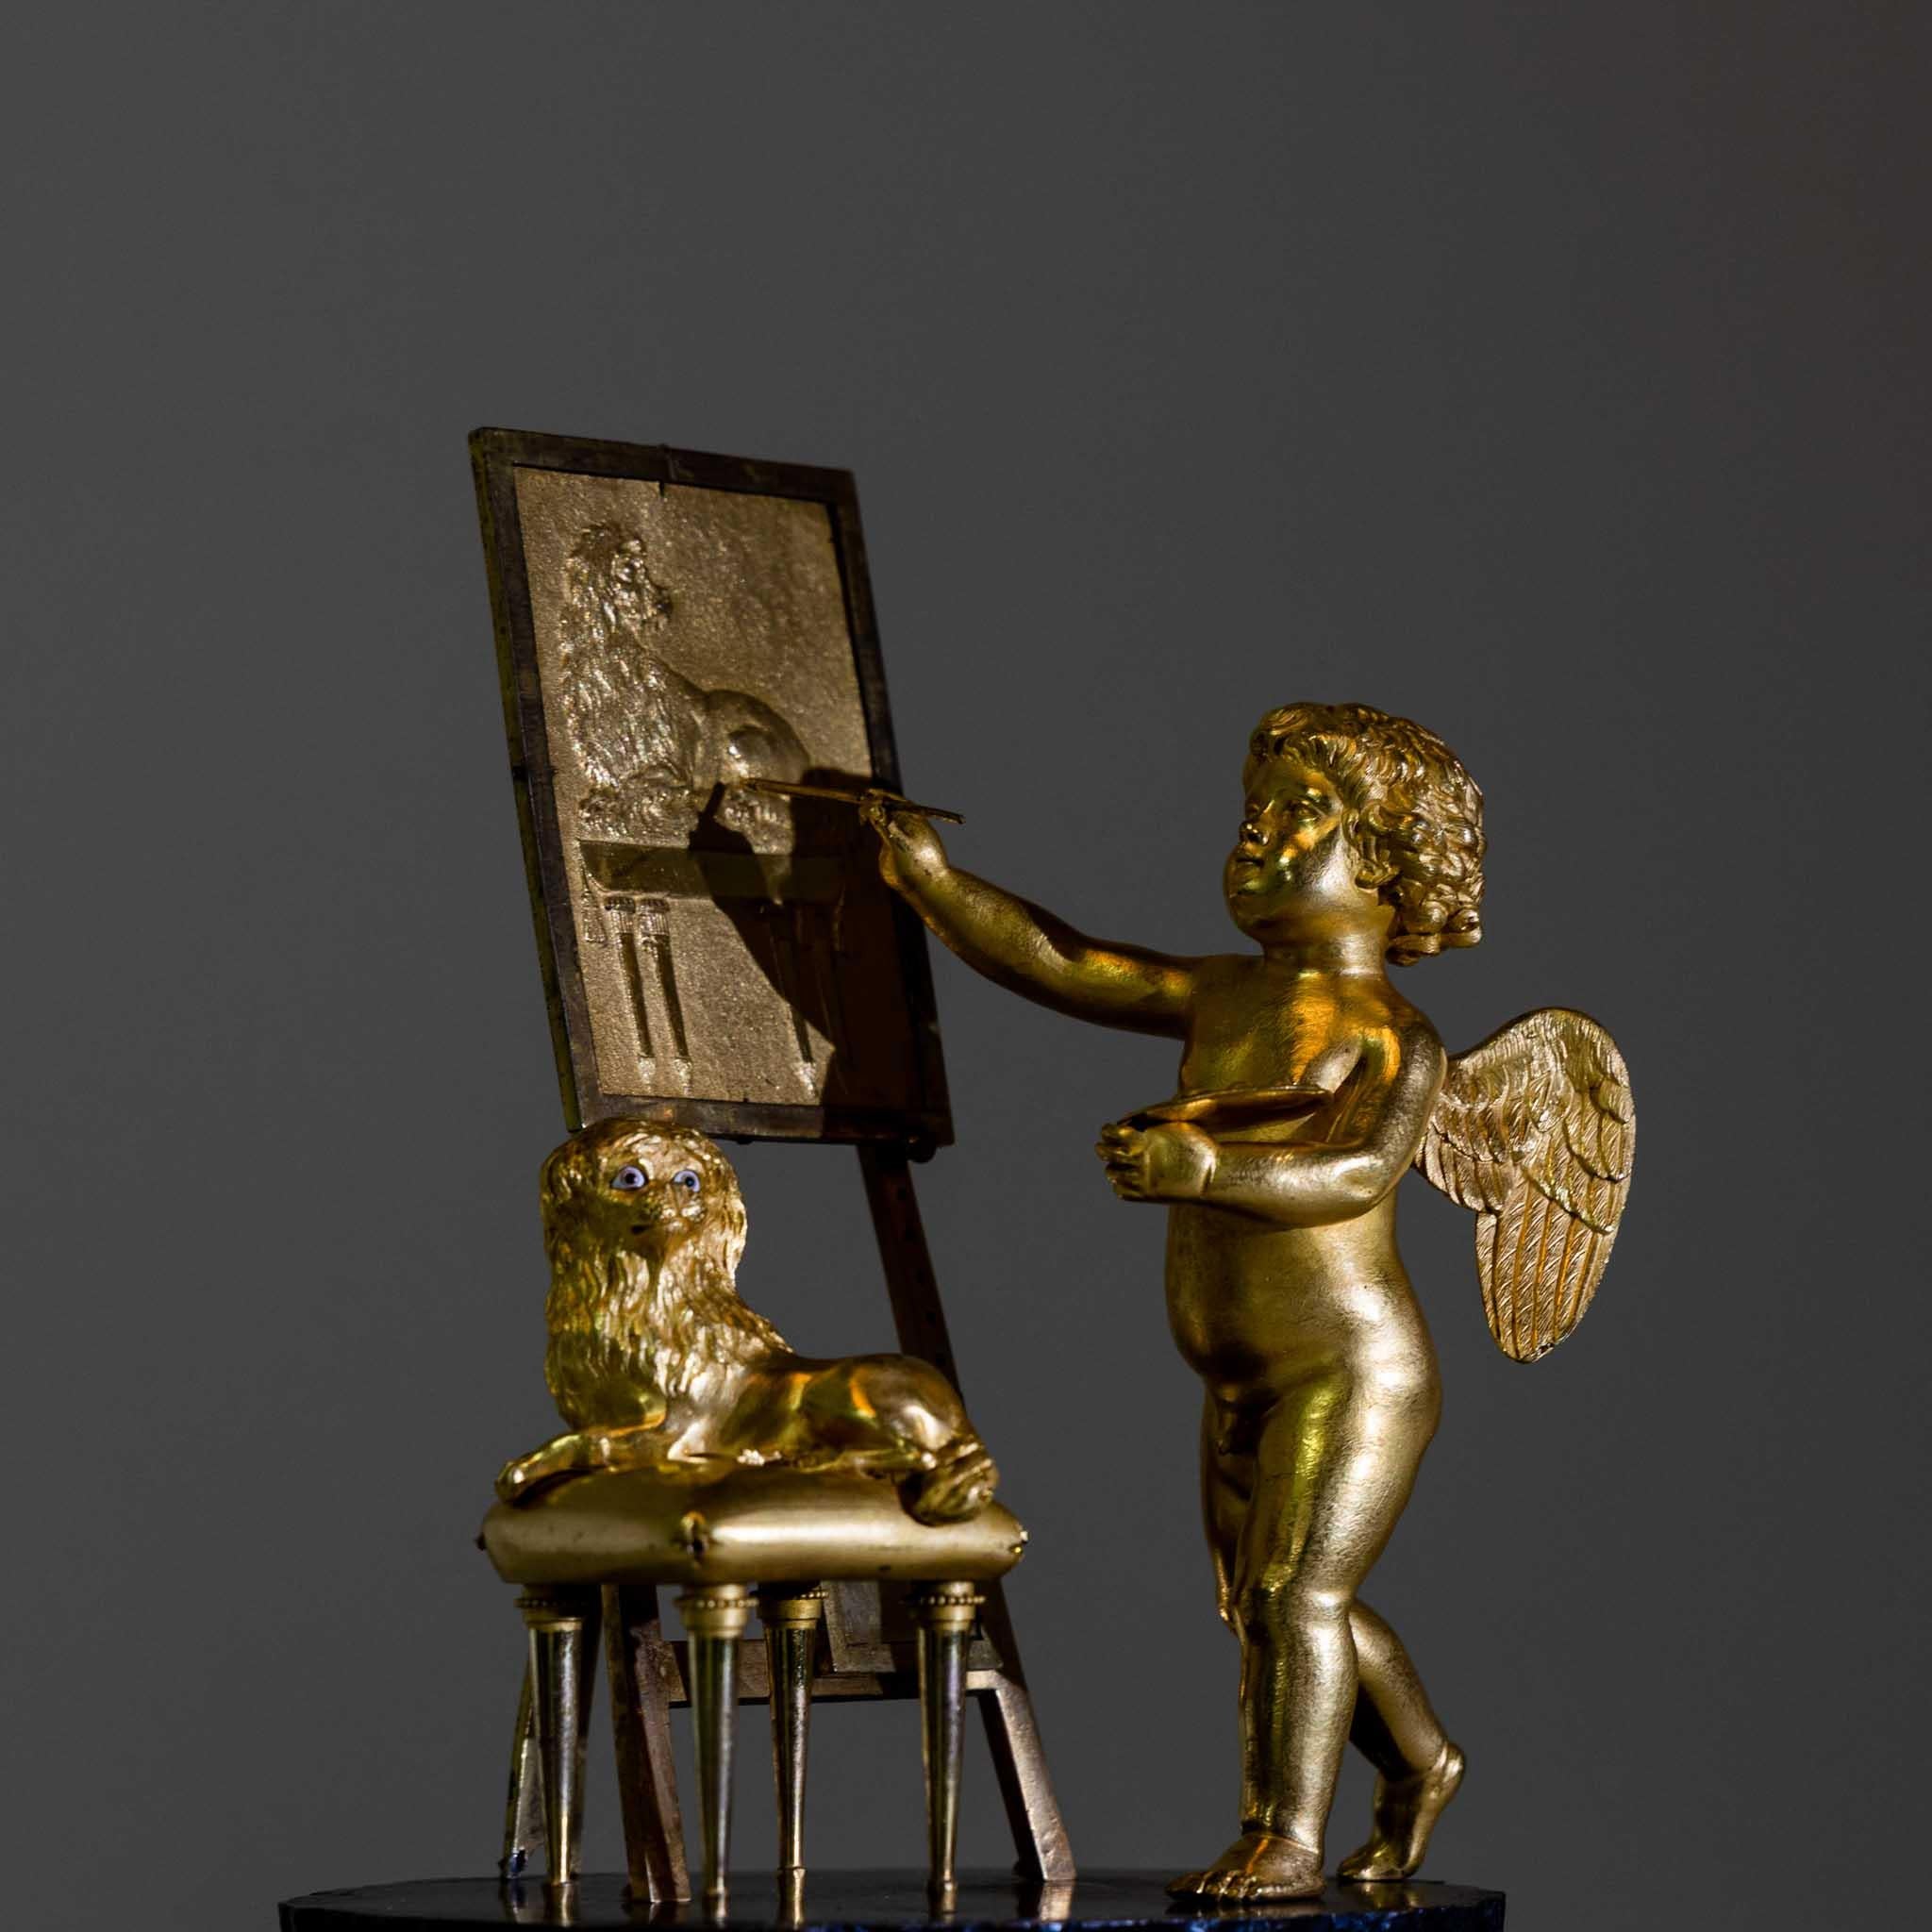 Fire-gilt and burnished bronze pendulum clock with Amor as painter. The case is made in the shape of a tree stump and stands on a smooth plinth with lion paws. The enamel dial with Roman hours is signed: Dubuc H.ger (Horloger) à Paris. The fire-gilt